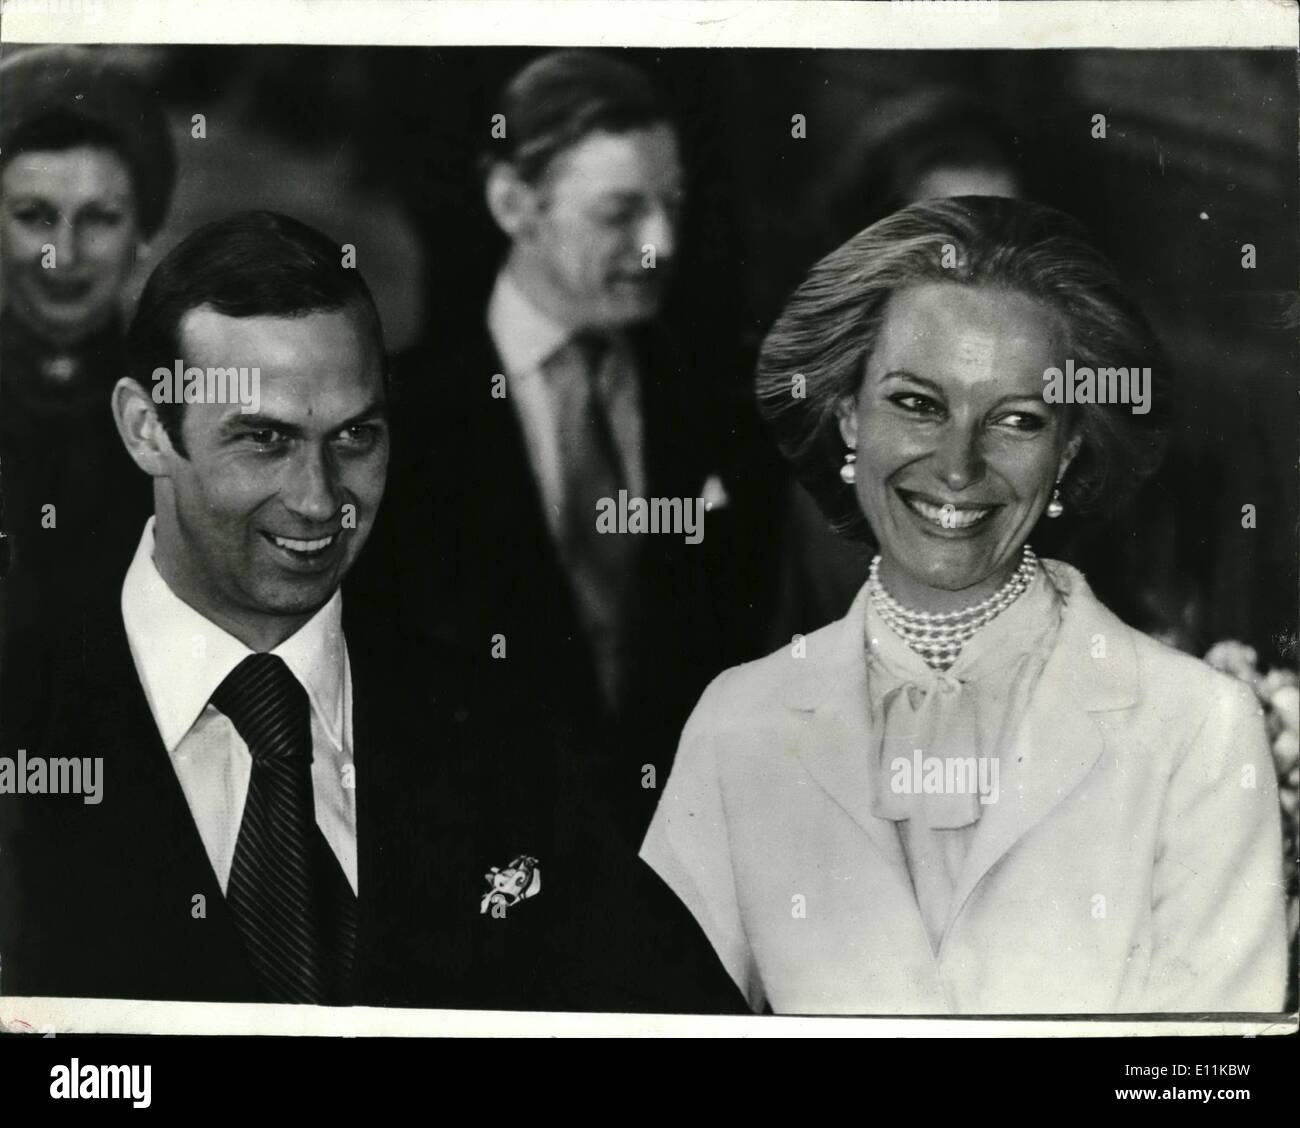 Jun. 06, 1978 - Prince Michael Of Kent And Baroness Marie Christine Von Reibnitz After Their Marriage In Vienna: The marriage of Prince Michael and Baroness Marie - Christine von Reibnitz took palace in a civil service in Vienna on Friday. Guests at the wedding were. His brother the Duke of Kent, Mr. Angus Ogilvy, Princess Alexandre, Princess Anne Lord Mountbatten. Lady Helen Windsor. Photo shows Prince Michael and Baroness Marie Christine von Reibnitz after their civil ceremony in Vienna's Town Hall. Stock Photo